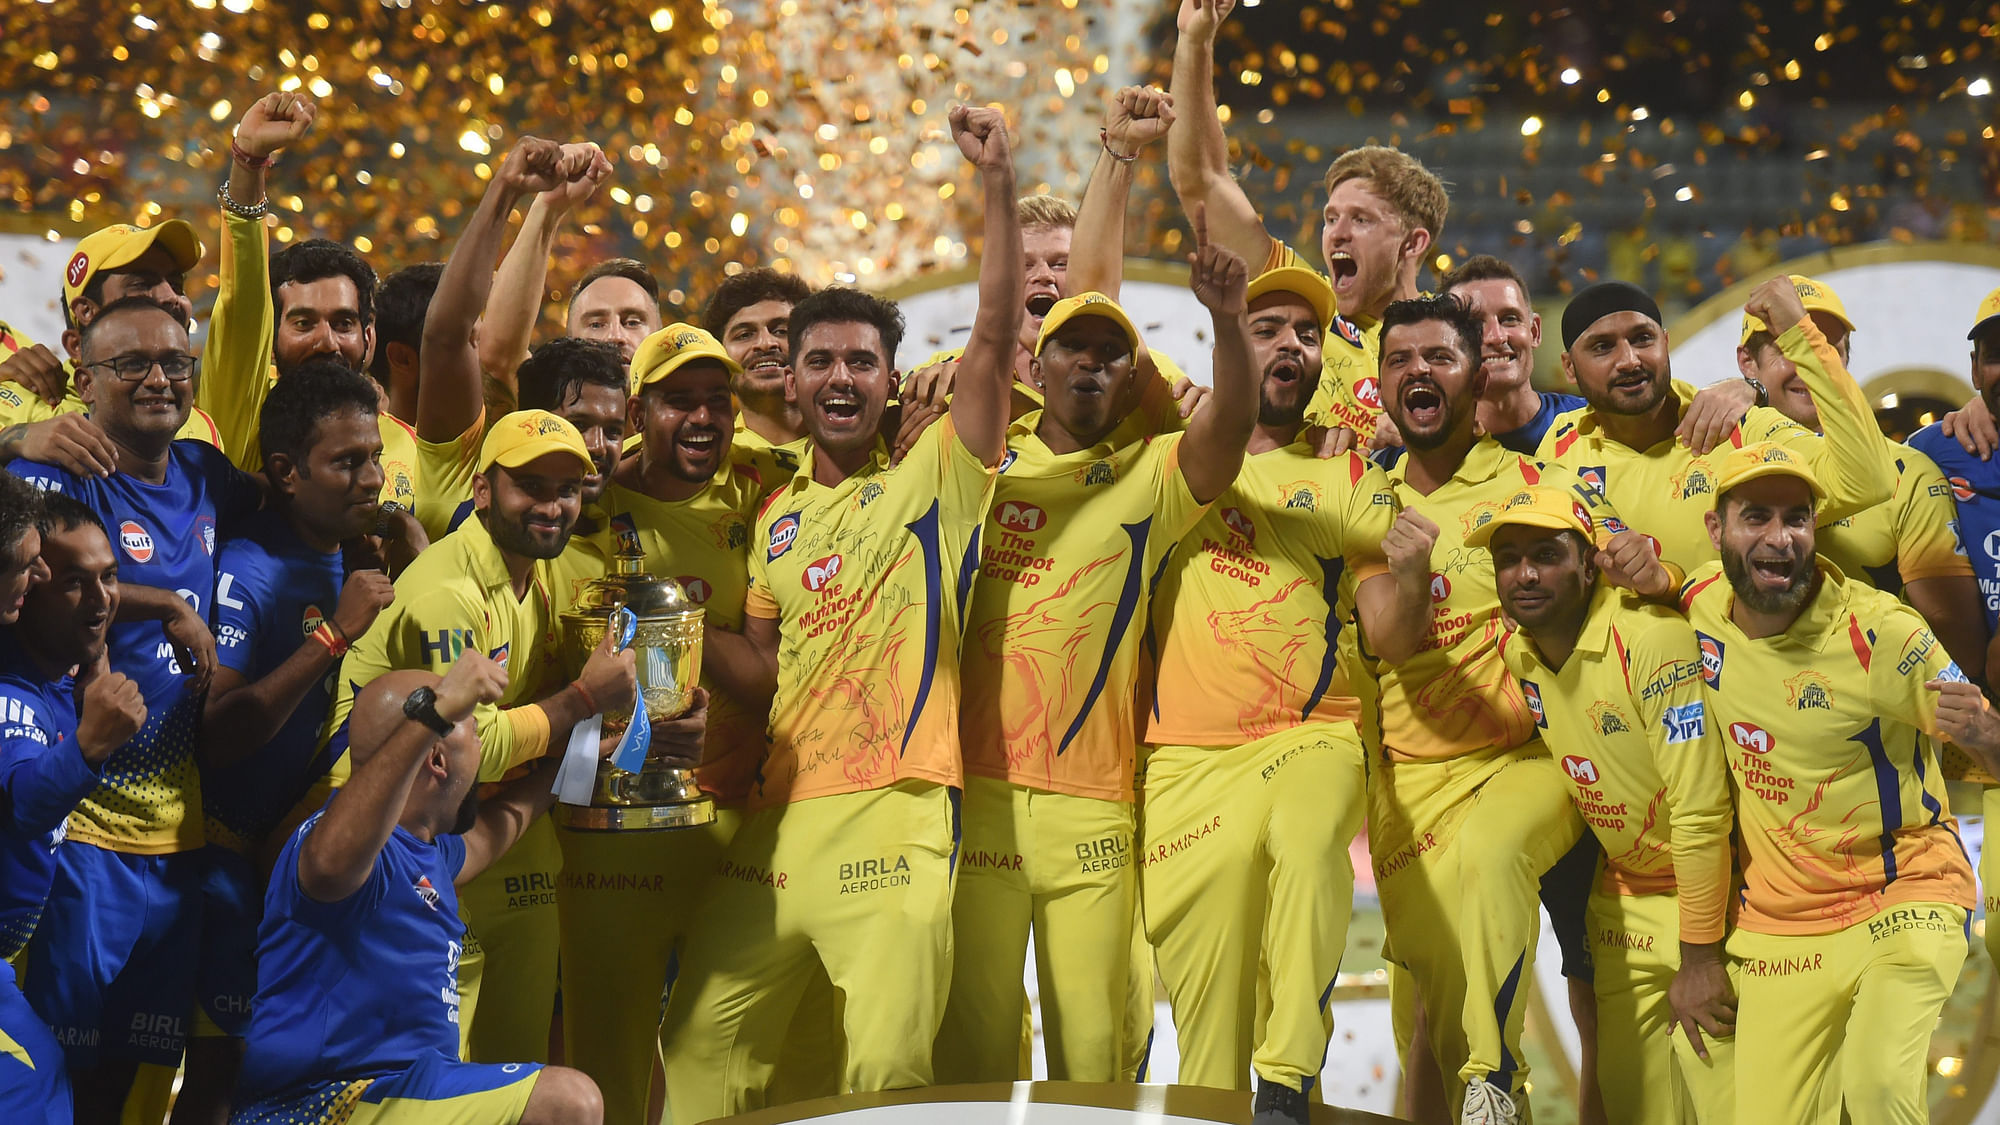 IPL 2020 Players: A look at what Chennai Super Kings’ squad looks like after the 2020 IPL auction retention deadline.